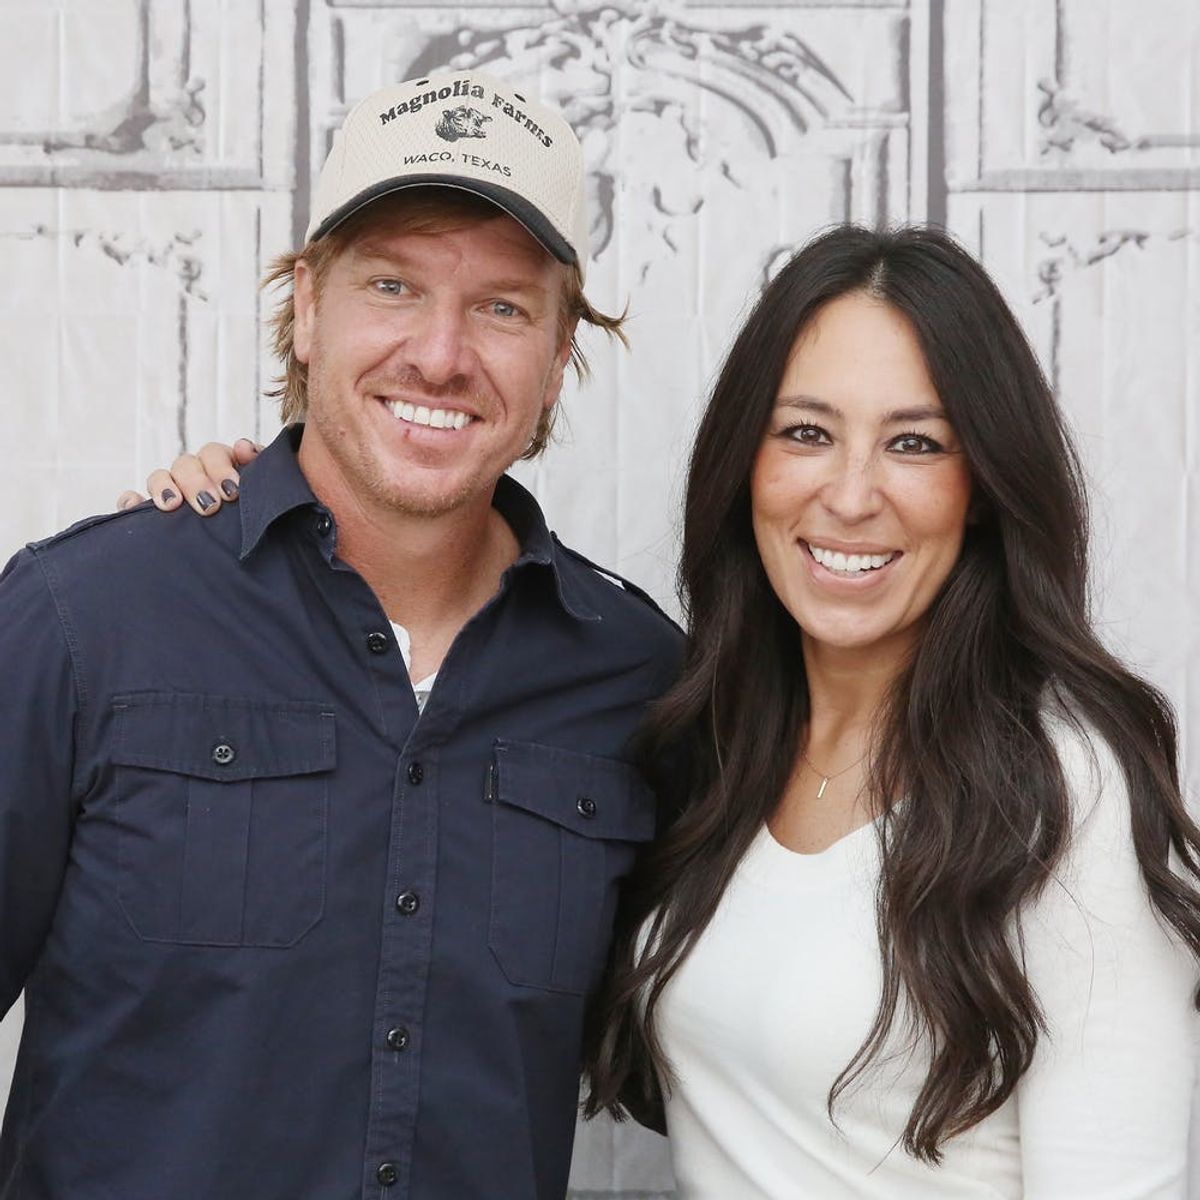 Chip and Joanna Gaines Will Donate All Proceeds from This Perfect Shirt to Hurricane Harvey Relief